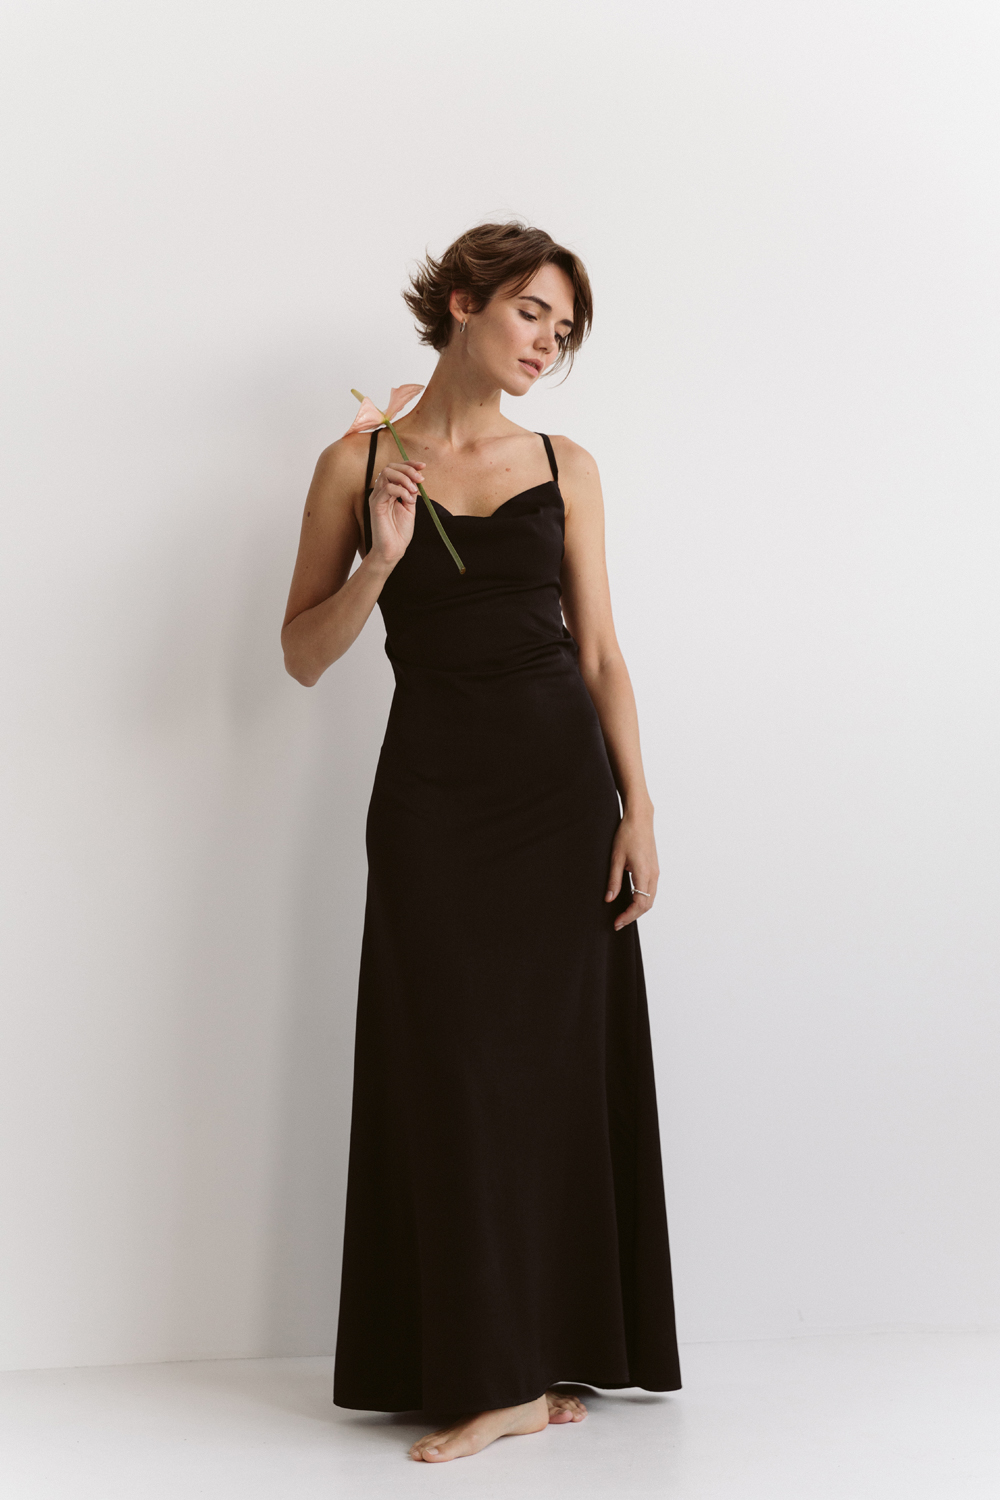 lack satin dress in linen style with open back